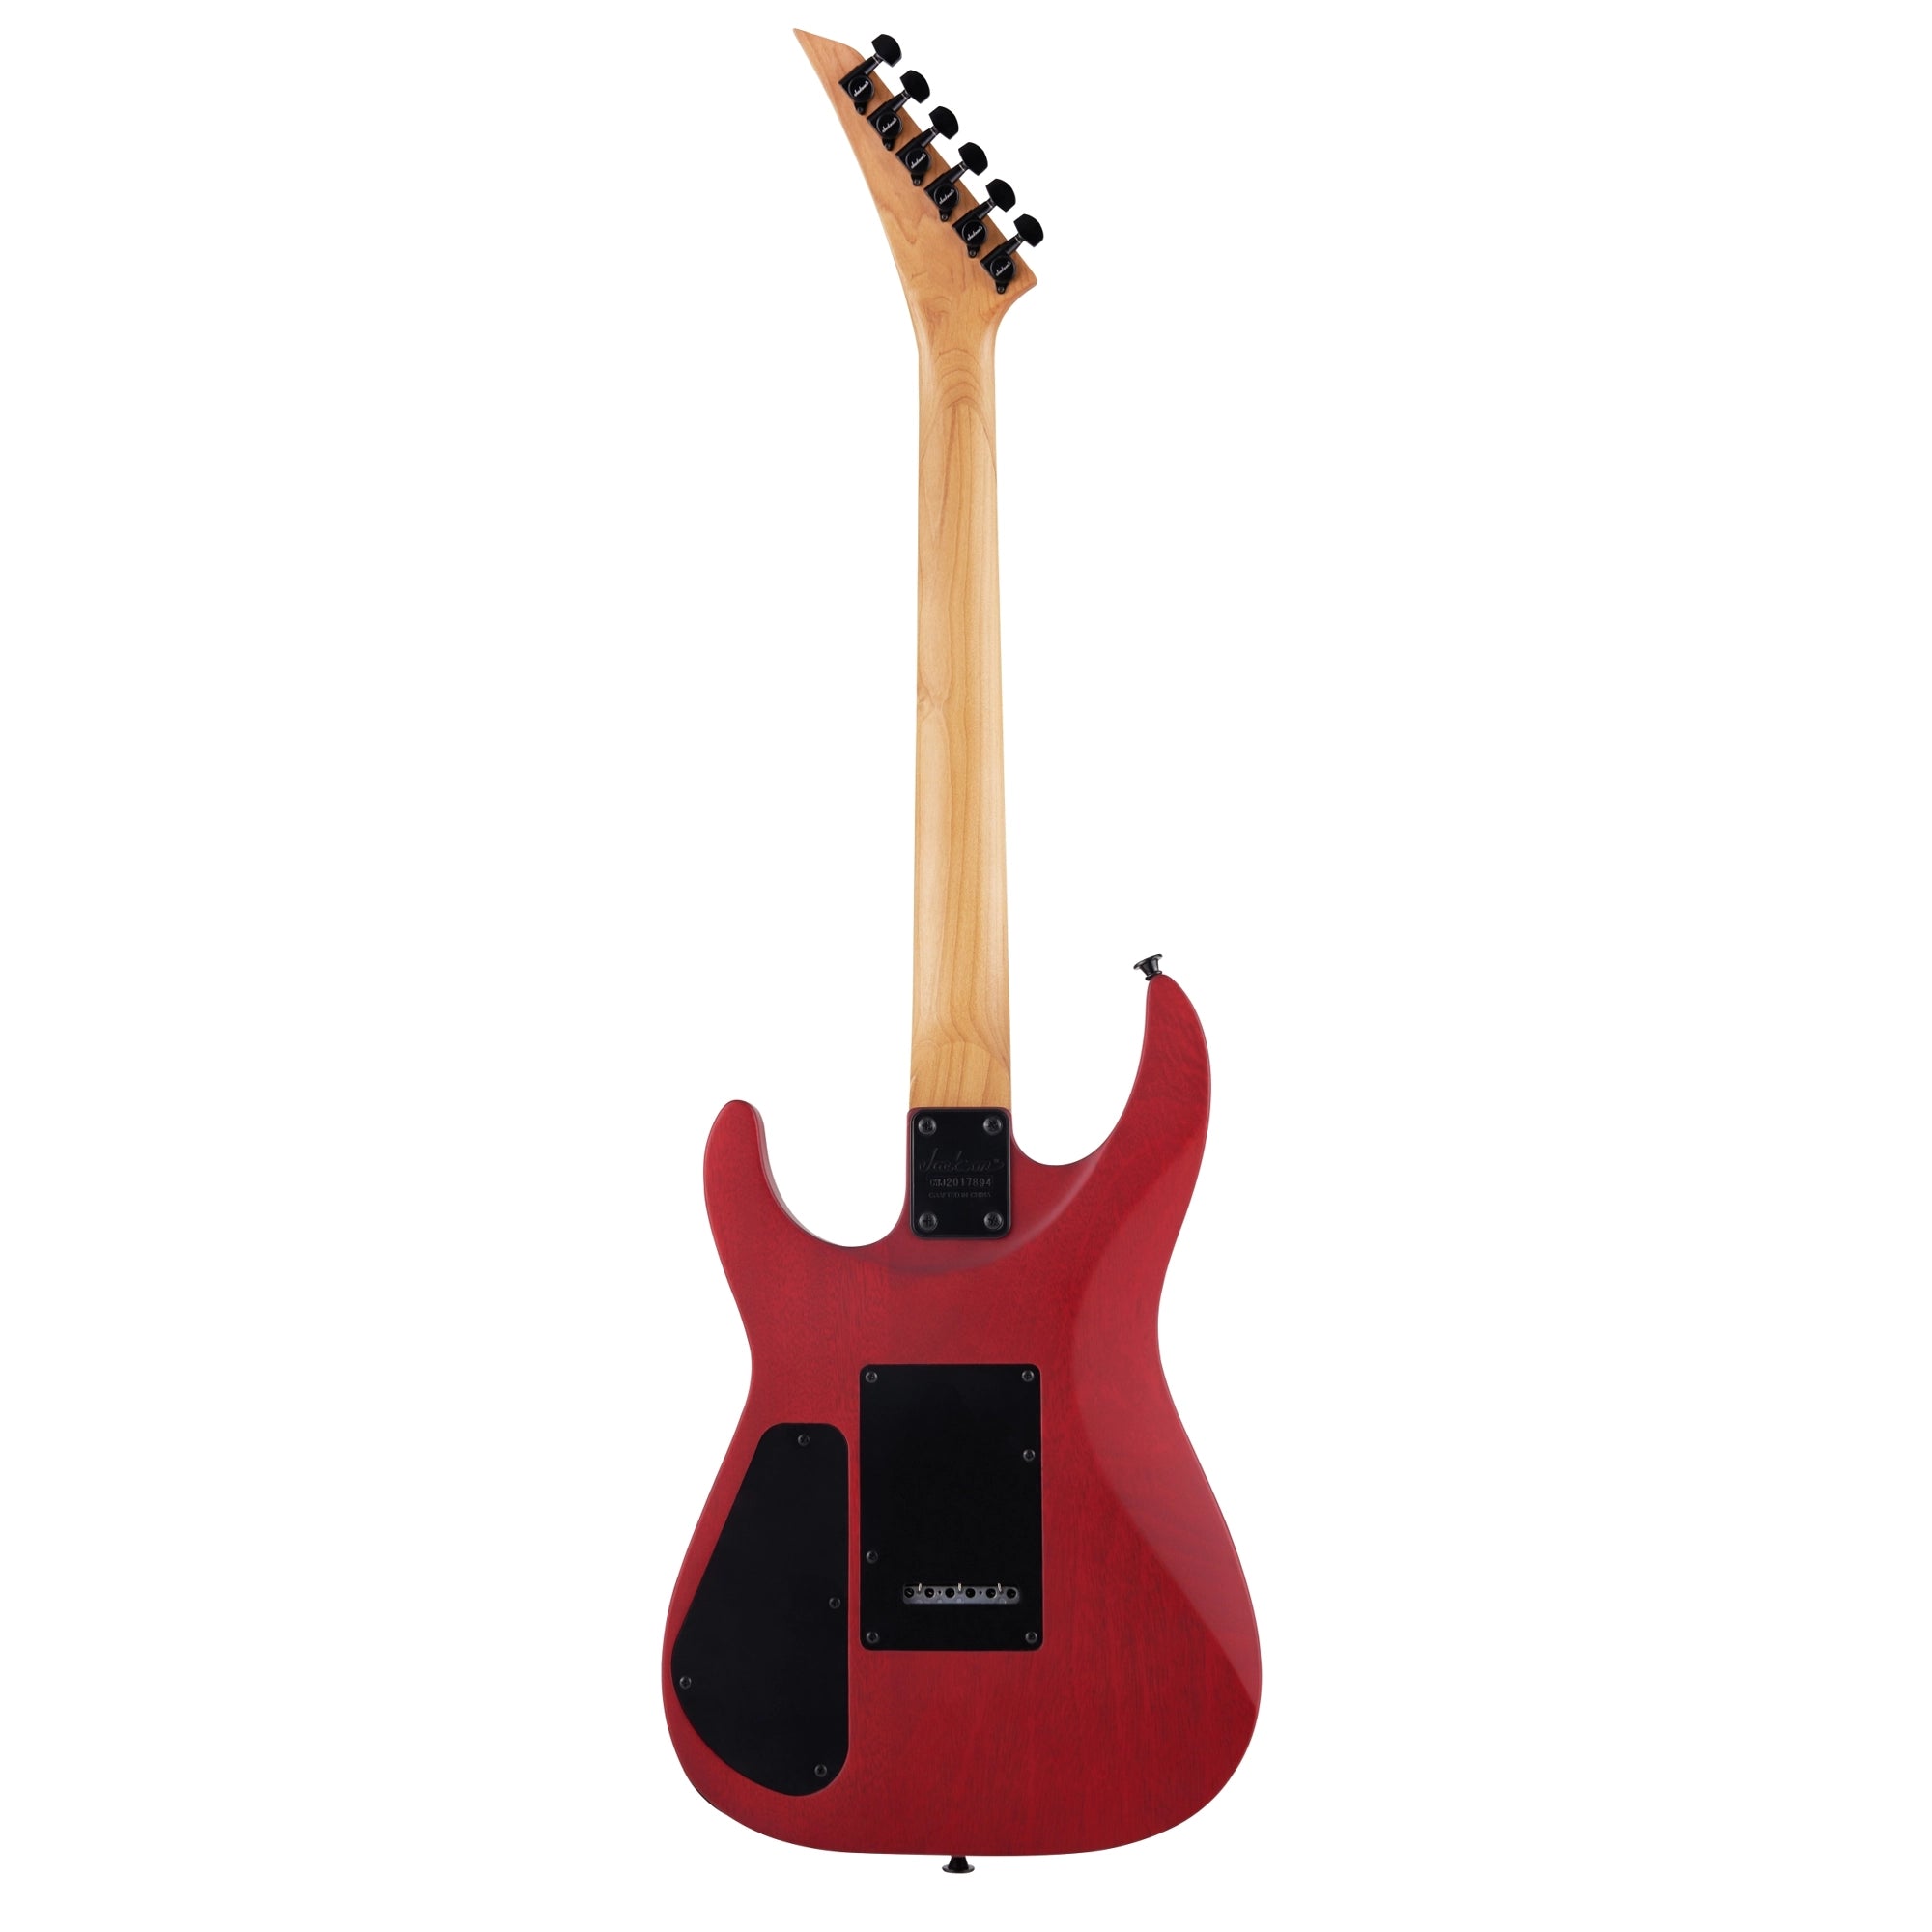 Jackson JS Series Dinky Arch Top JS24 Dkam Solidbody Electric Guitar - Red Stain